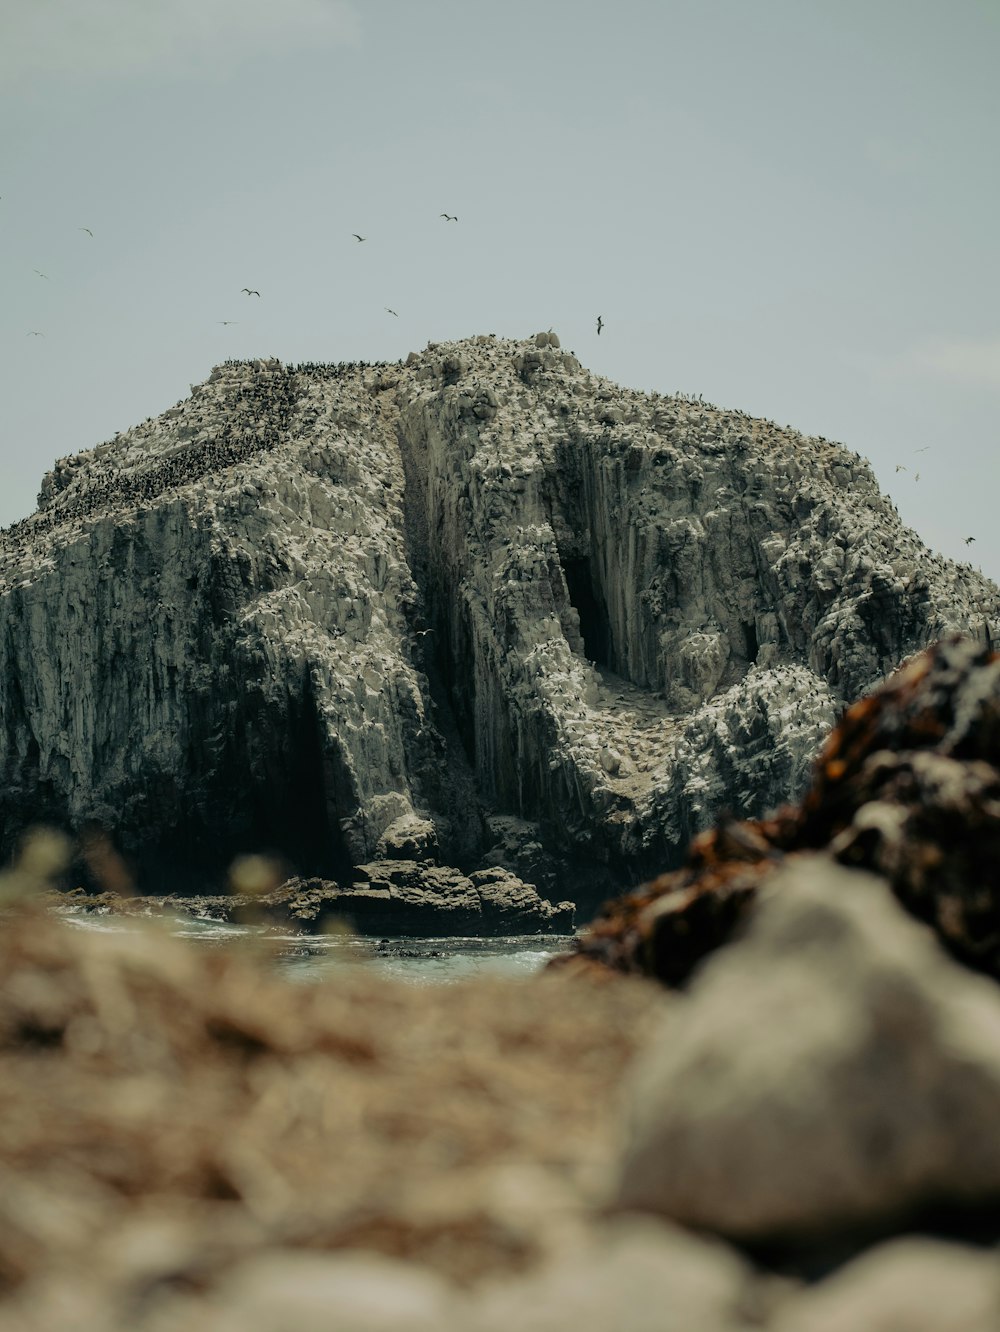 a rock outcropping in the ocean with birds flying over it